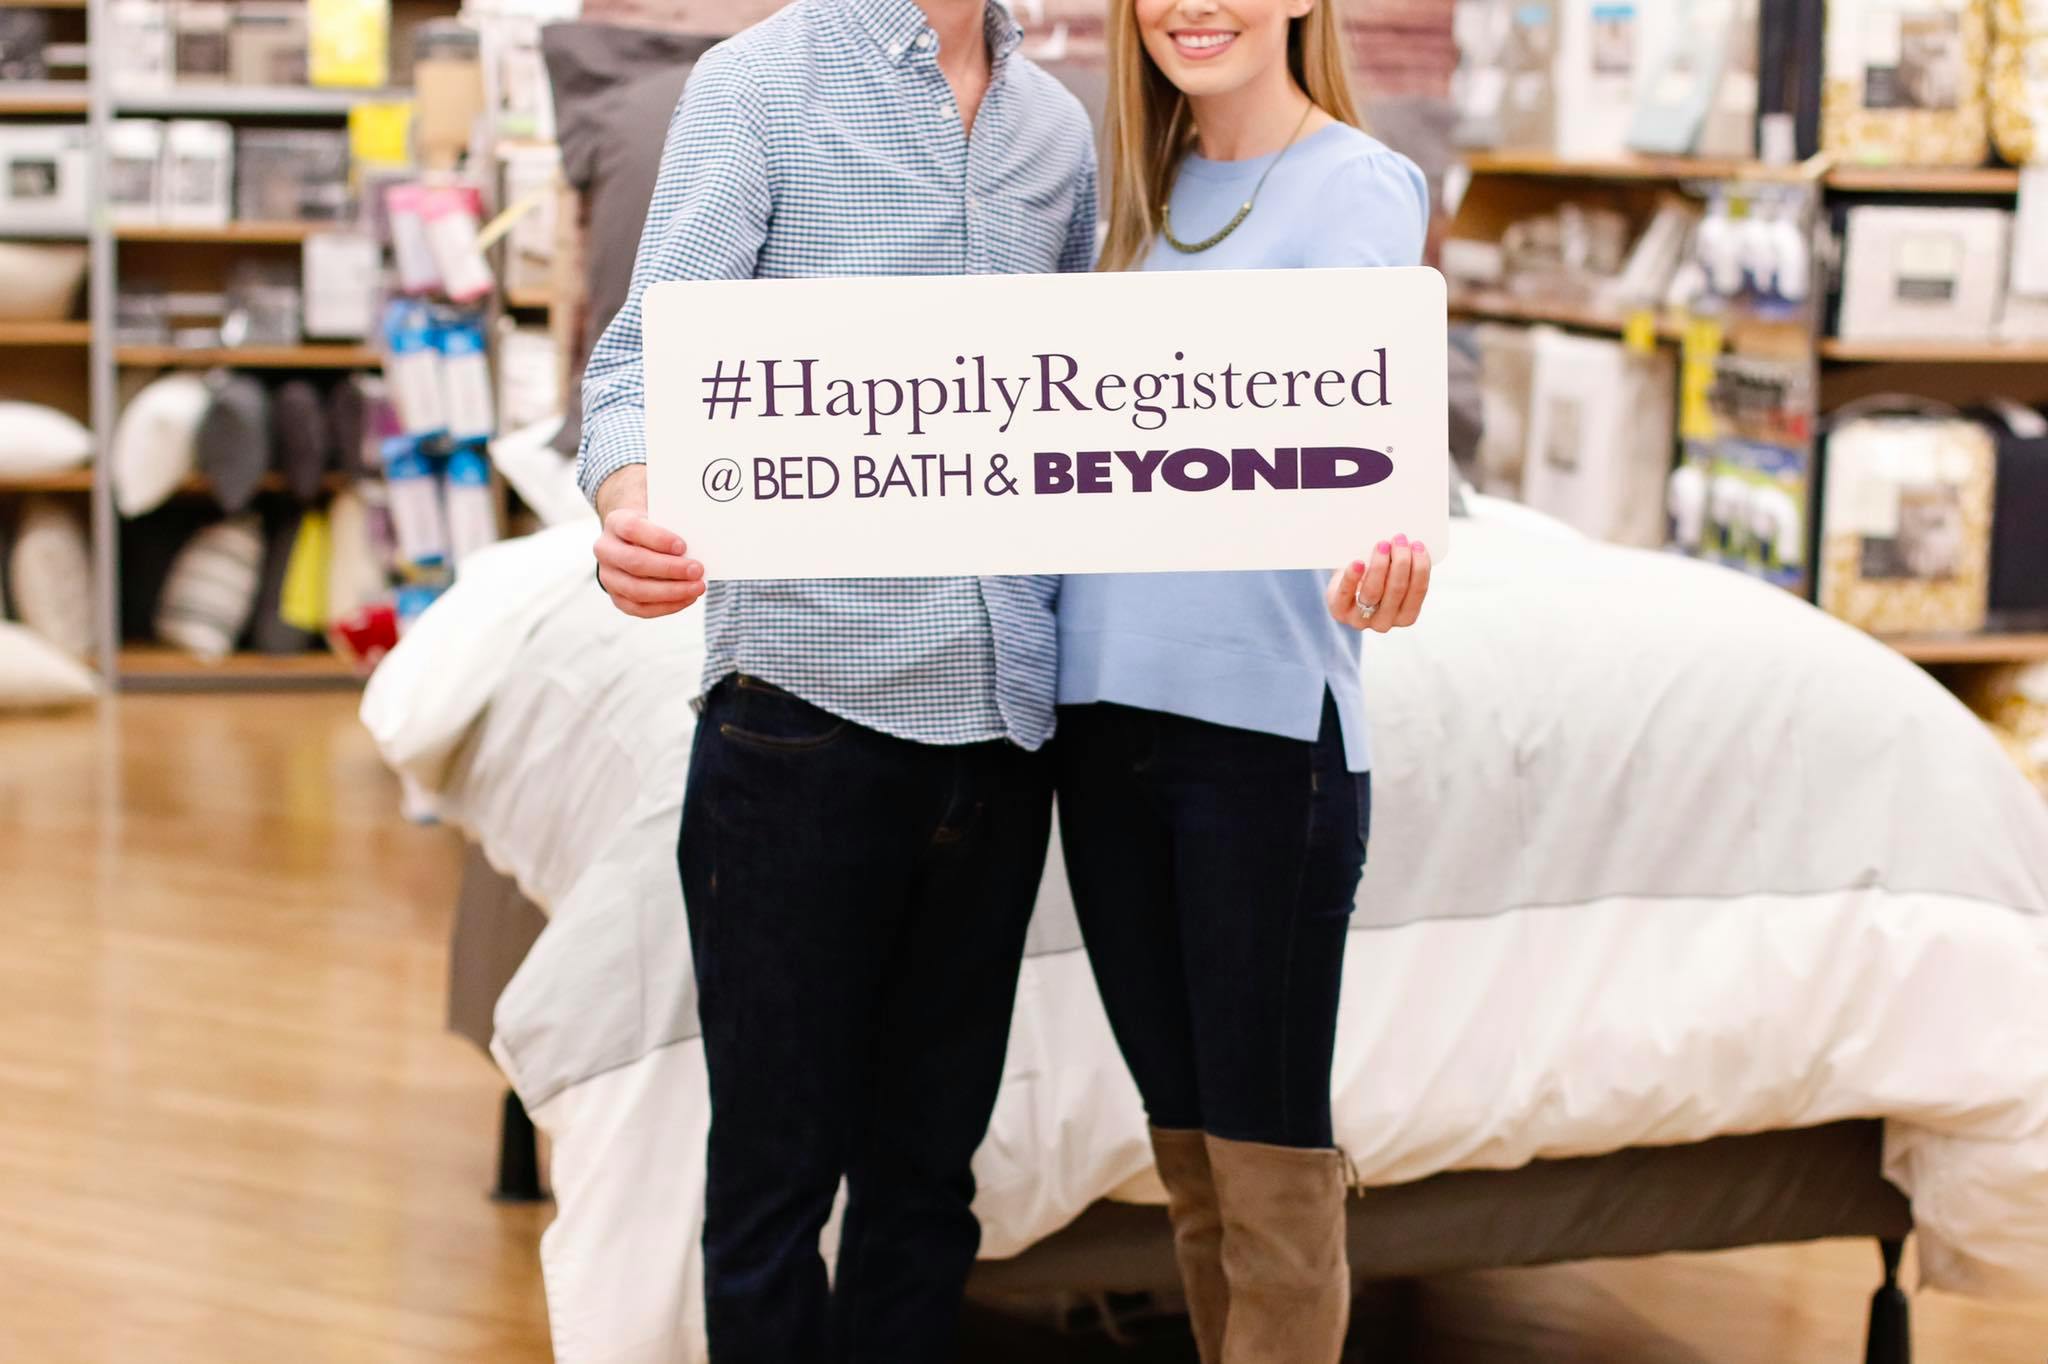 A couple standing inside a Bed Bath & Beyond store, holding a sign that reads, "#HappilyRegistered at Bed Bath & Beyond